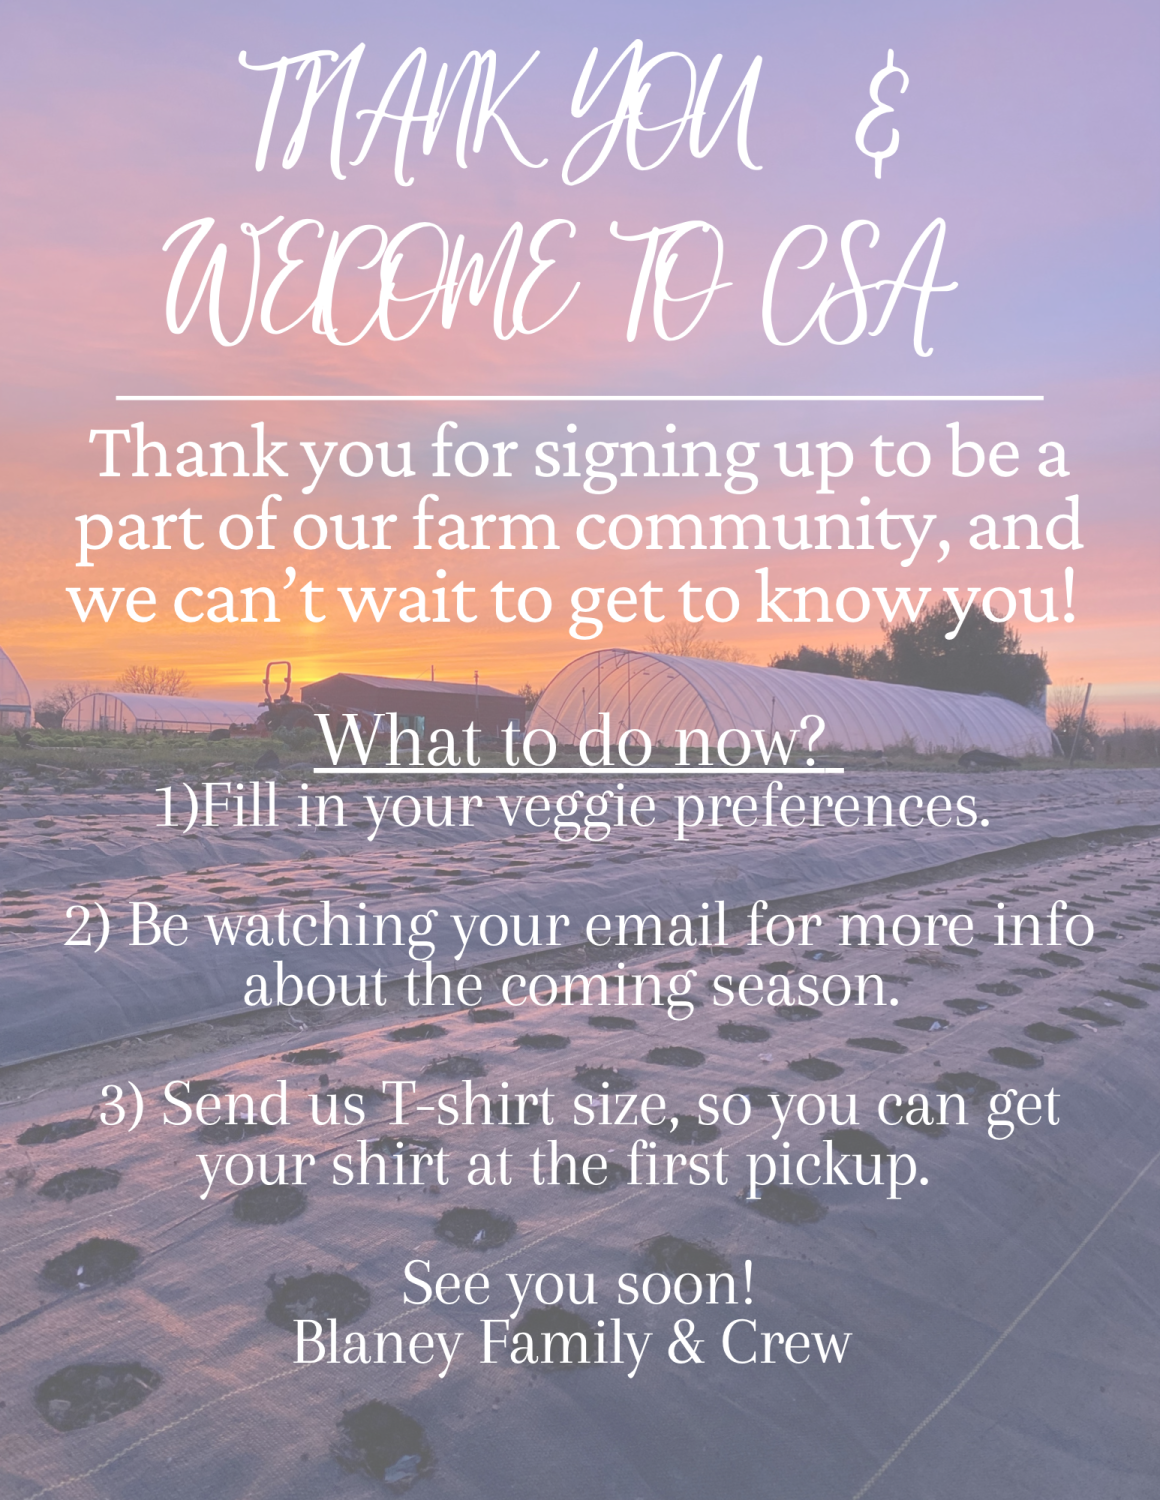 Next Happening: Welcome to CSA 2023!!!